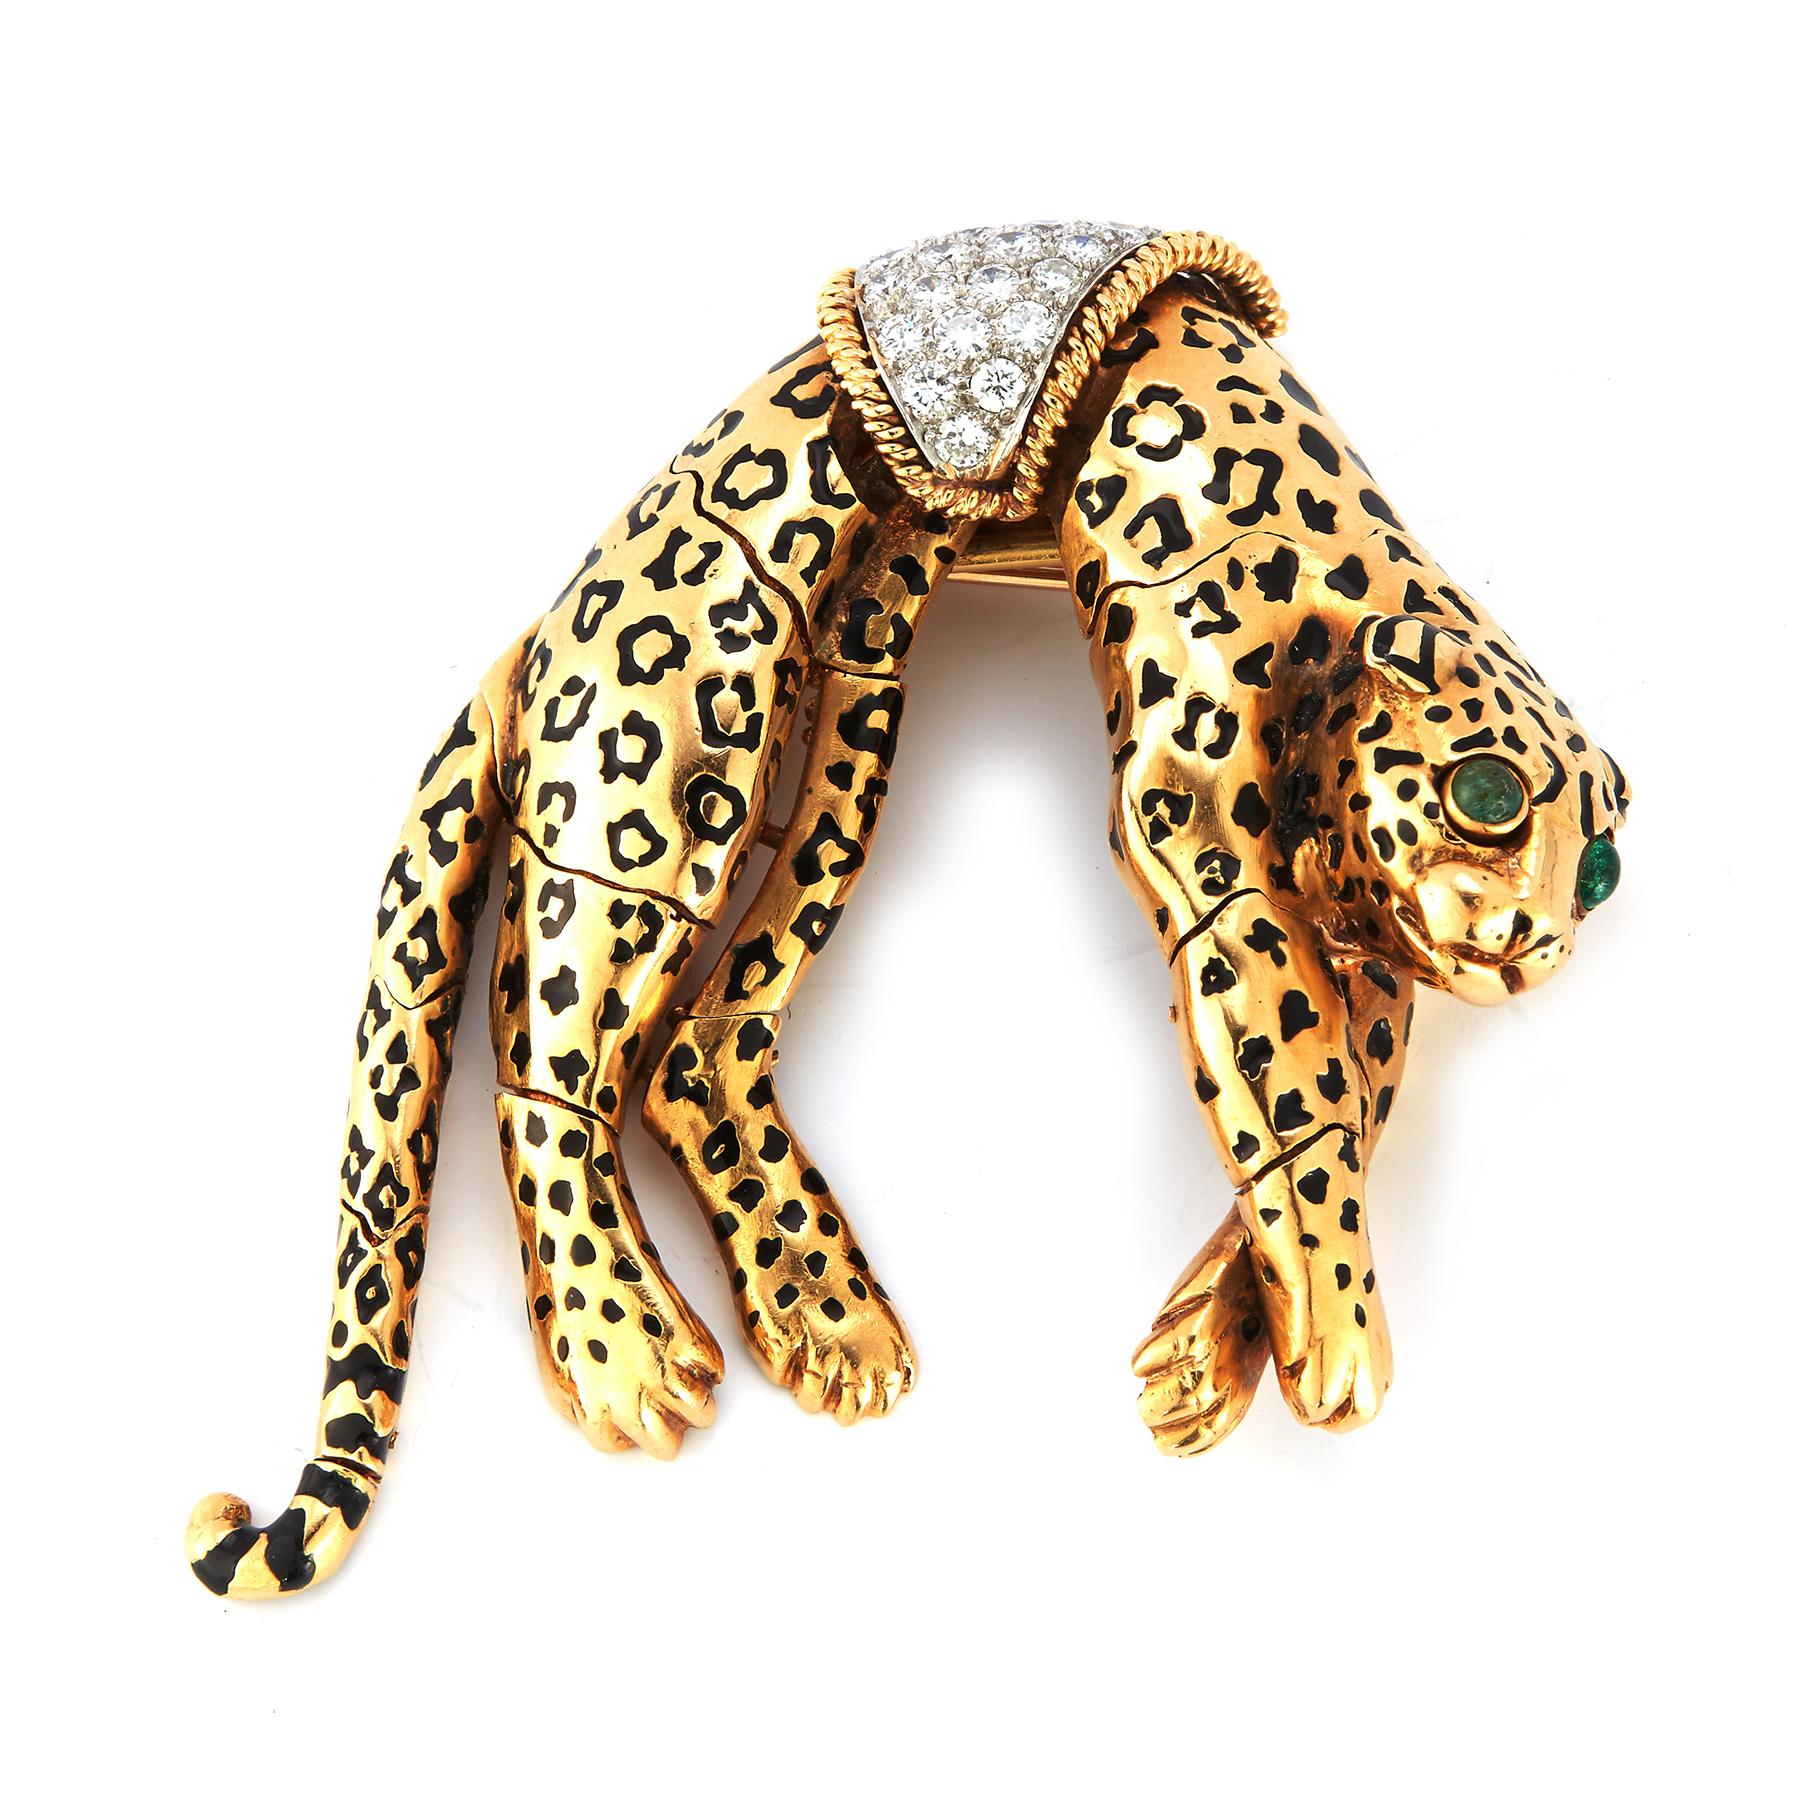 David Webb Panther Brooch

18 karat gold & black enamel with round cut diamonds & 2 emeralds as the eyes

Very well made, it is articulated- the legs move

Measurements: 2.25